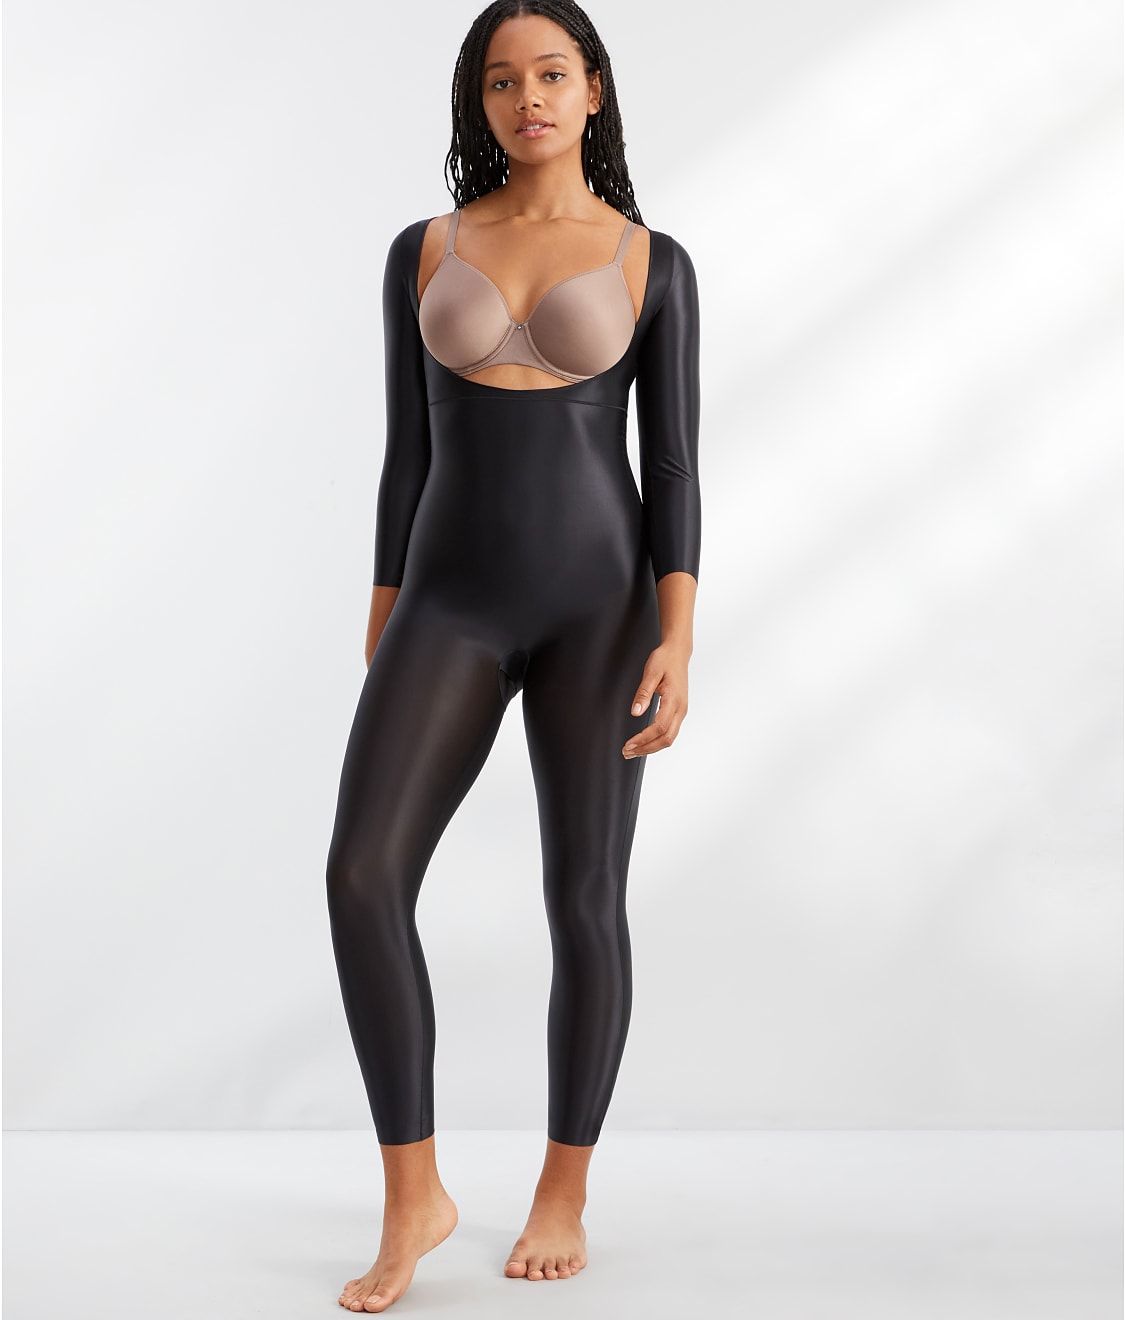 SPANX: Suit Your Fancy Firm Control Open-Bust Catsuit 10316R